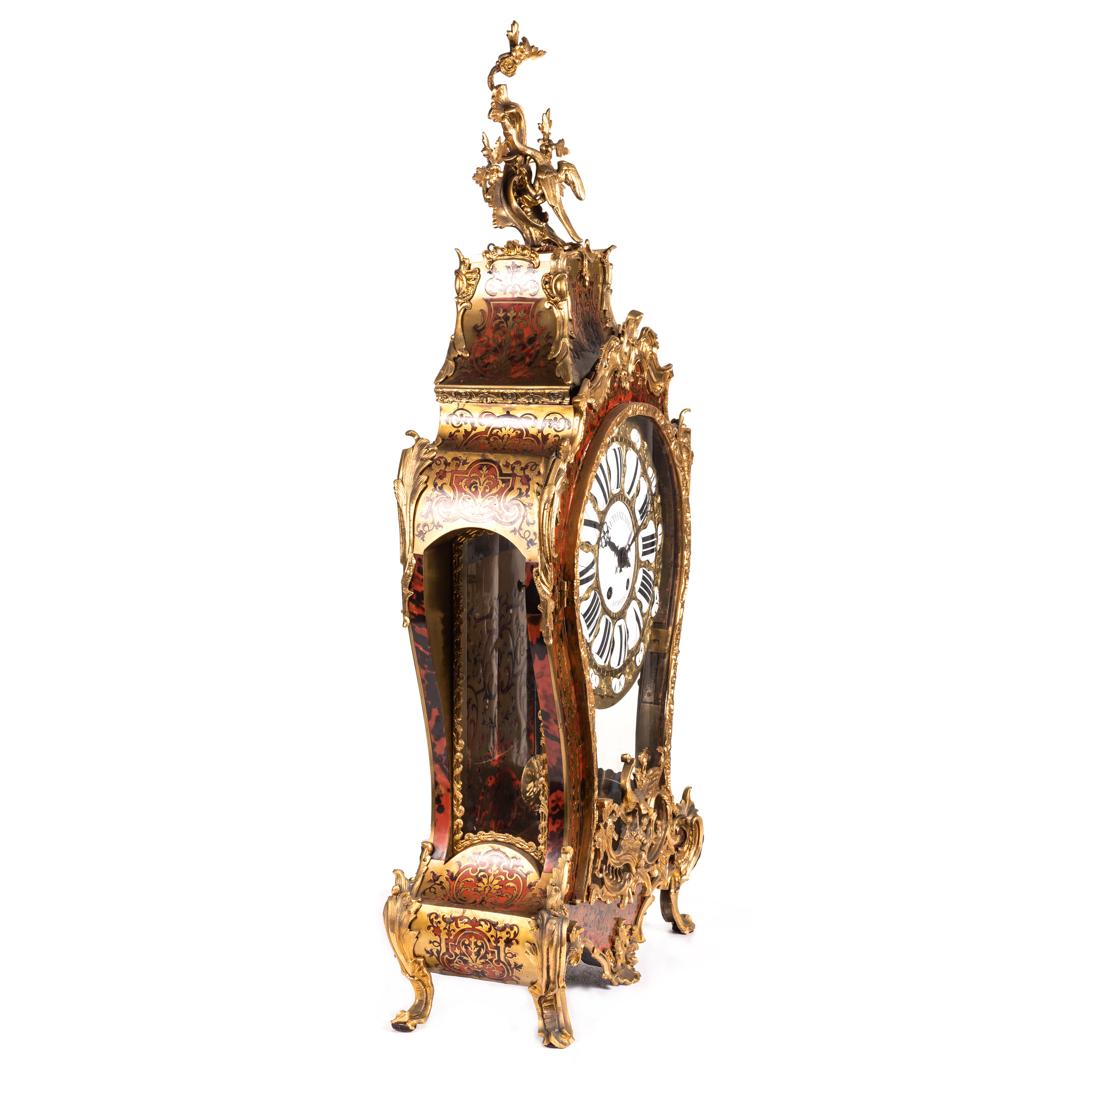 A gilt bronze-mounted brass inlaid tortoiseshell, boulle marquetry and ebony veneered mantel clock, the dial and movement signed Balthazar à Paris
late 19th century
dial with white enamel Roman numerals, above an enameled plaque signed Balthazar à